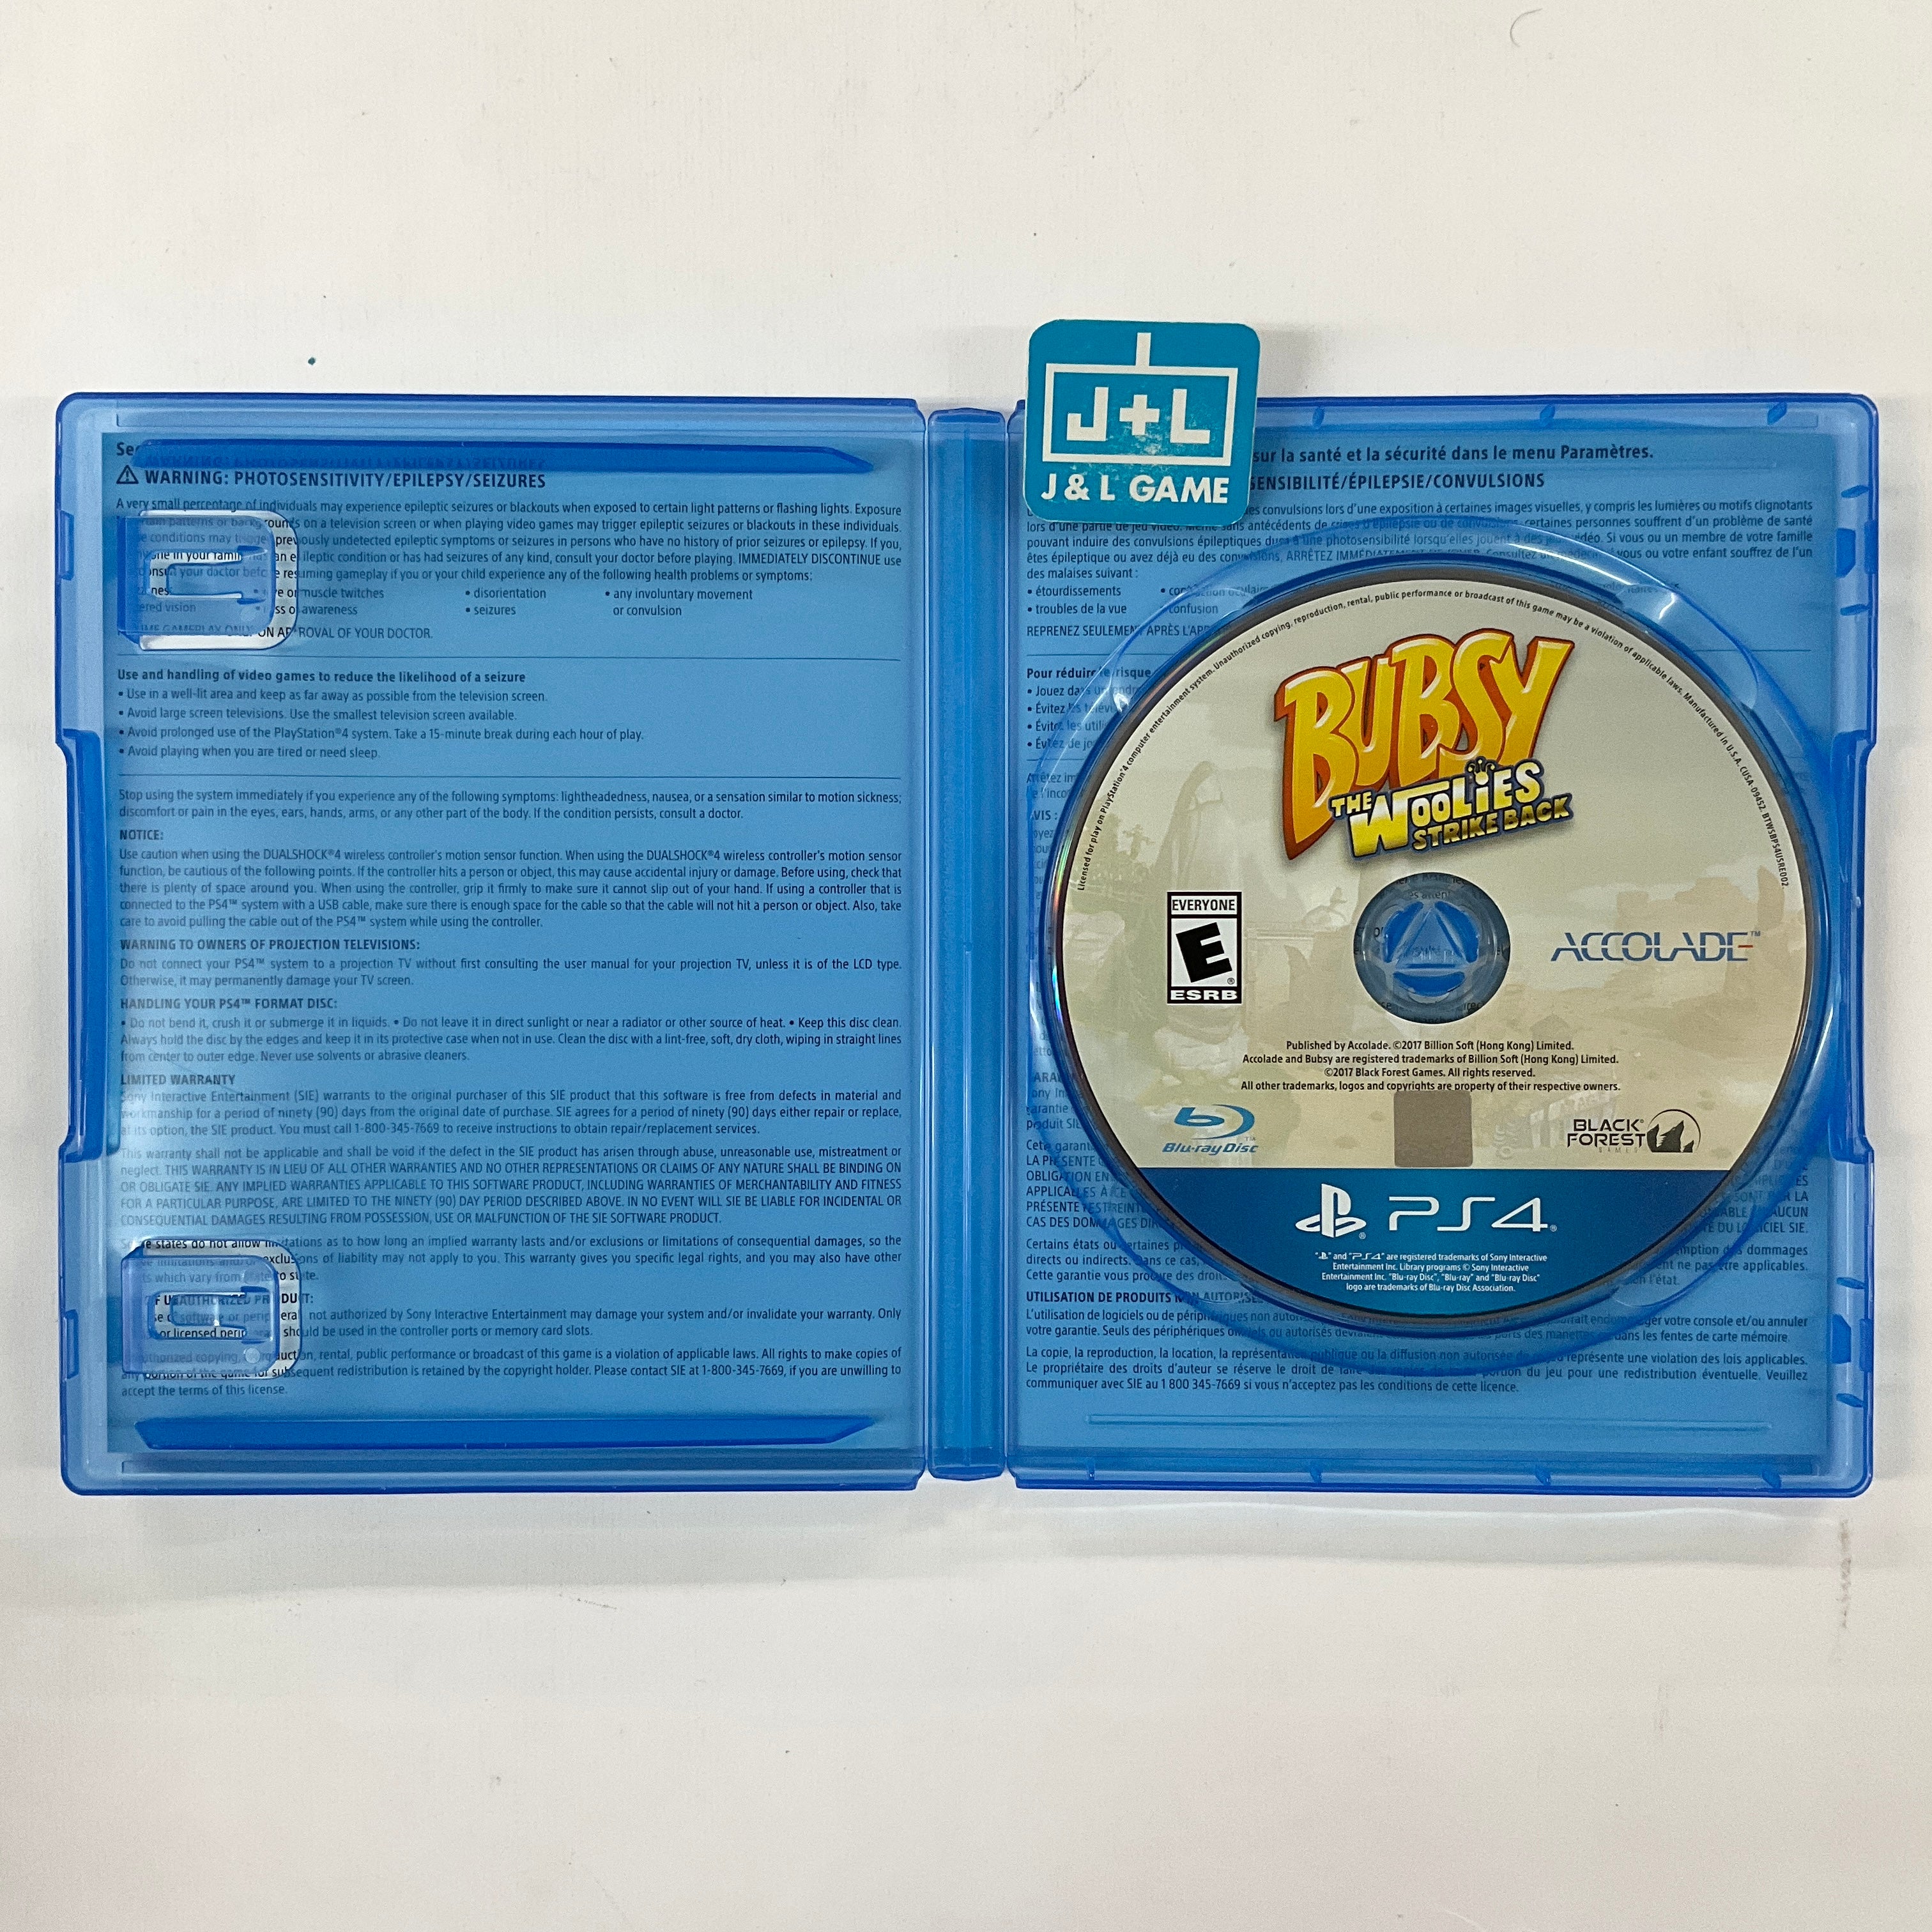 Bubsy The Woolies Strike Back - (PS4) PlayStation 4 [Pre-Owned] Video Games Accolade   